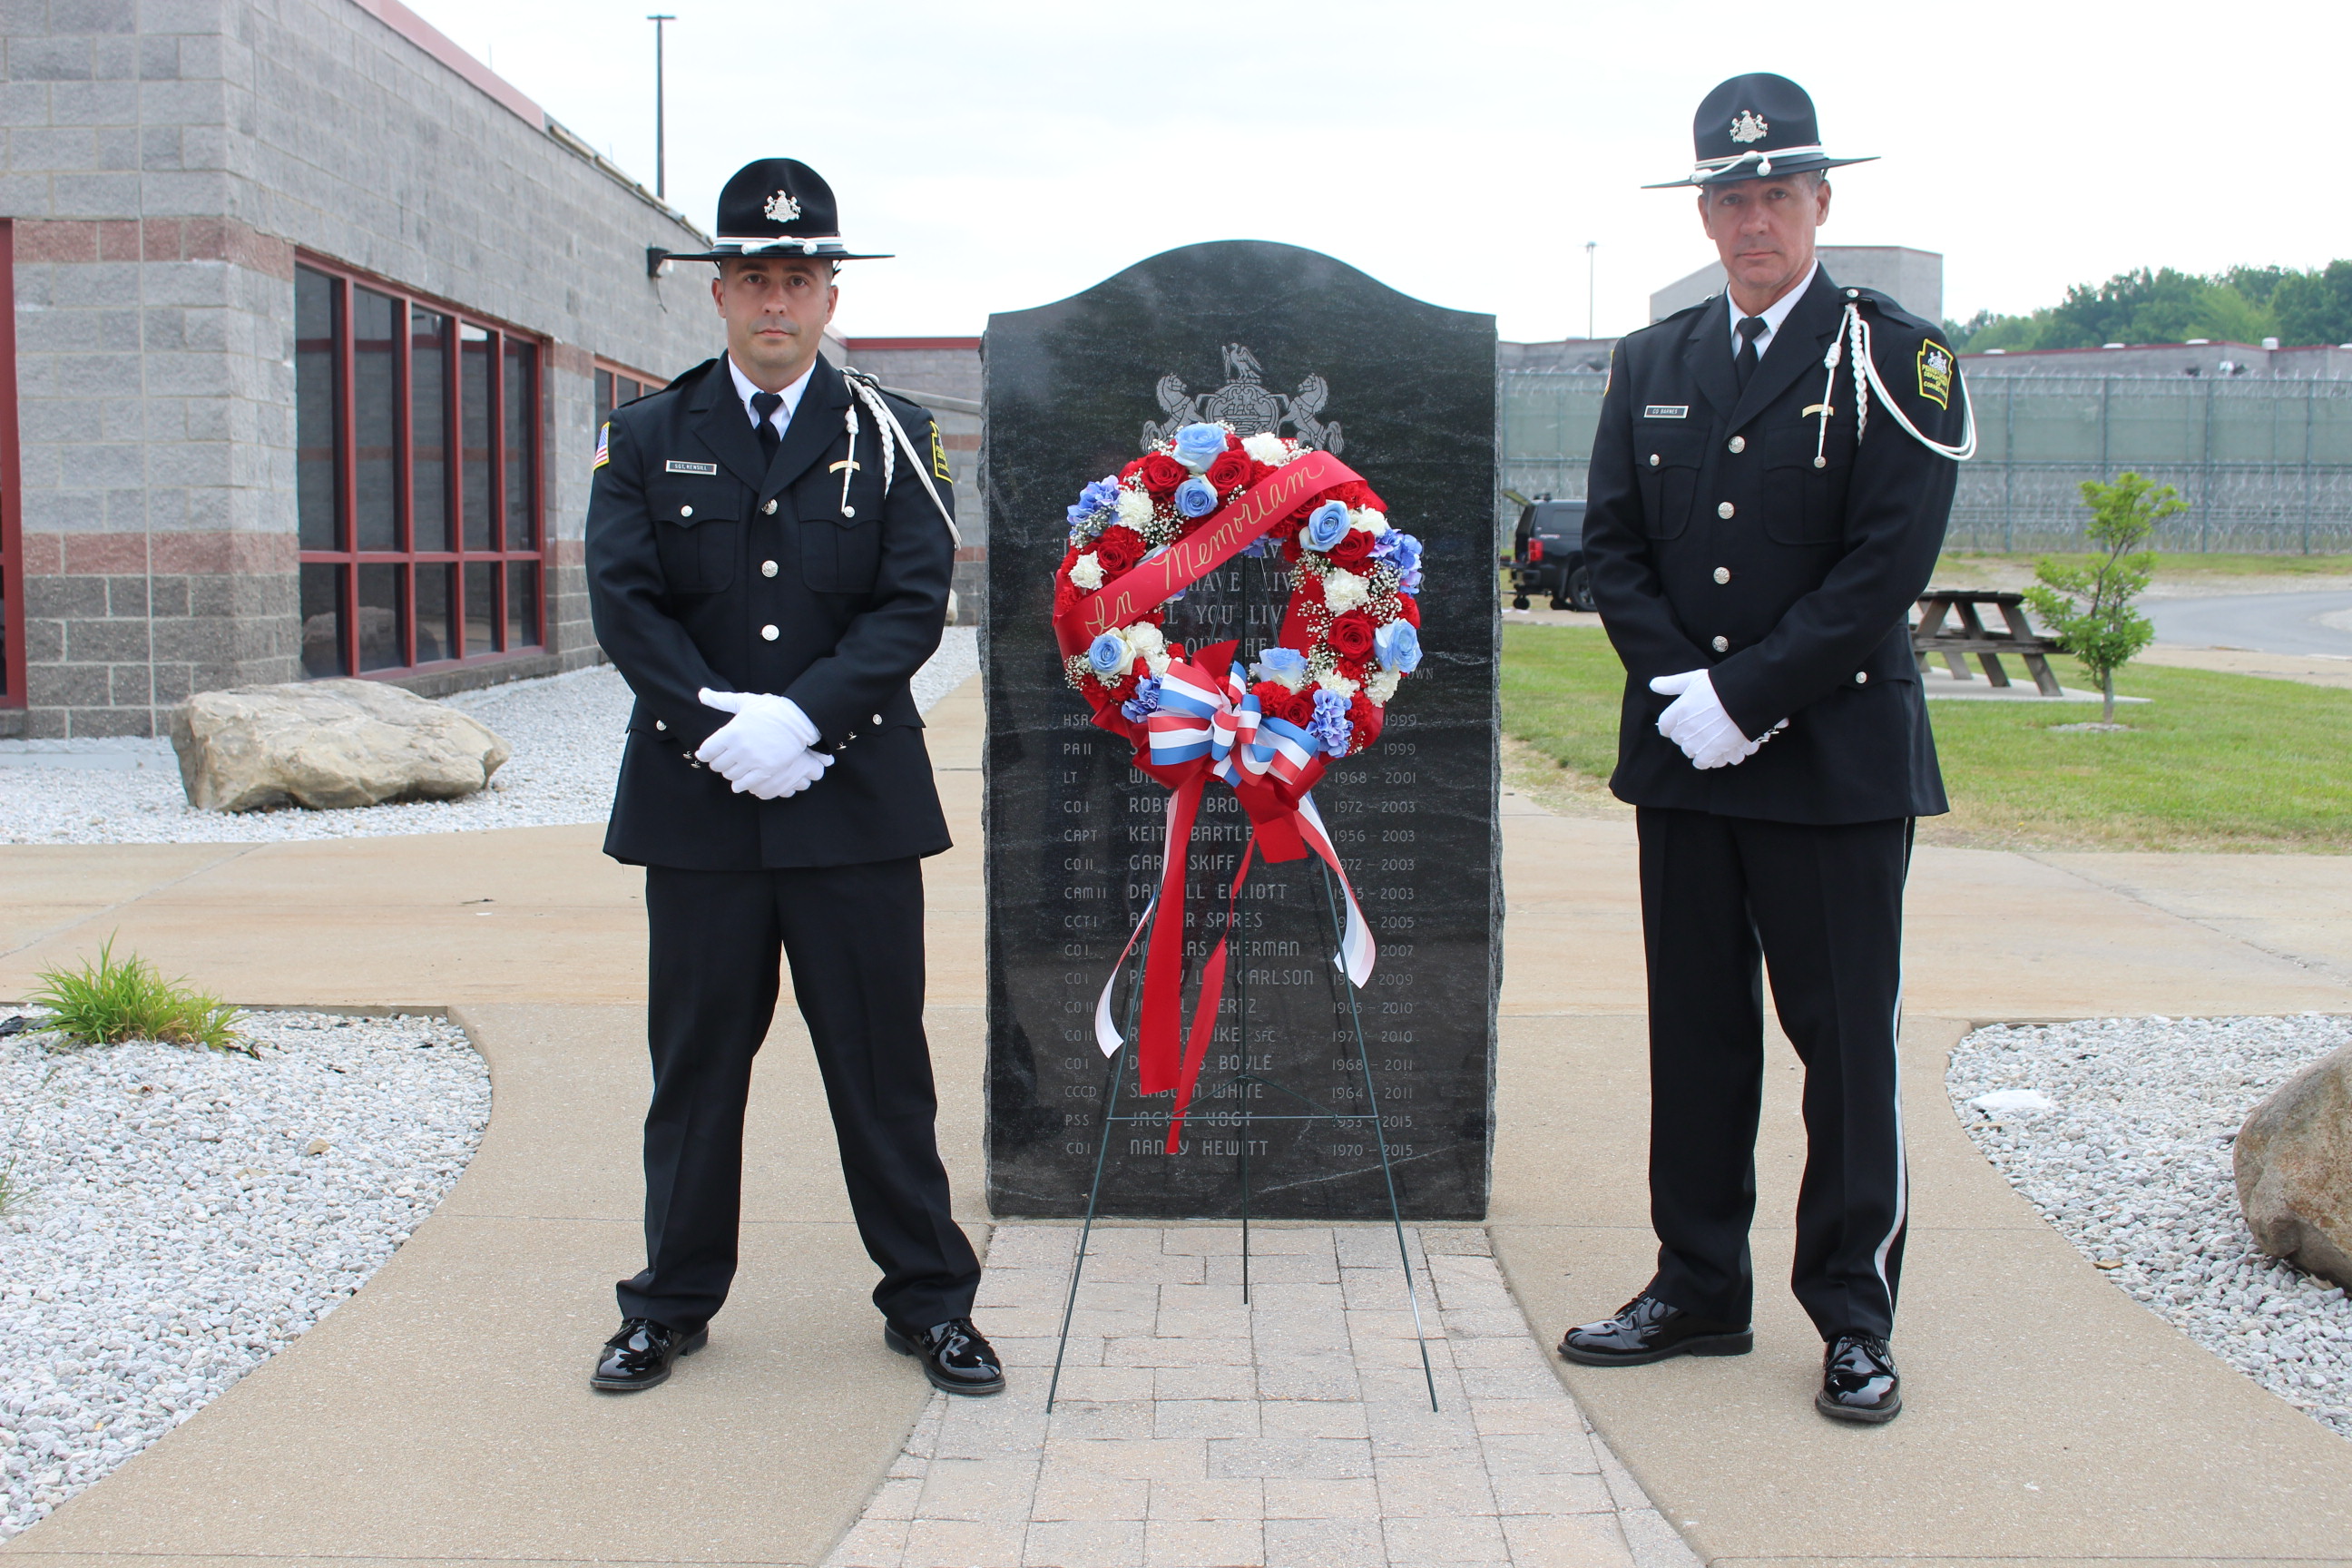 Two members of the SCI Albion Honor Guard stand at the Albion Memorial.